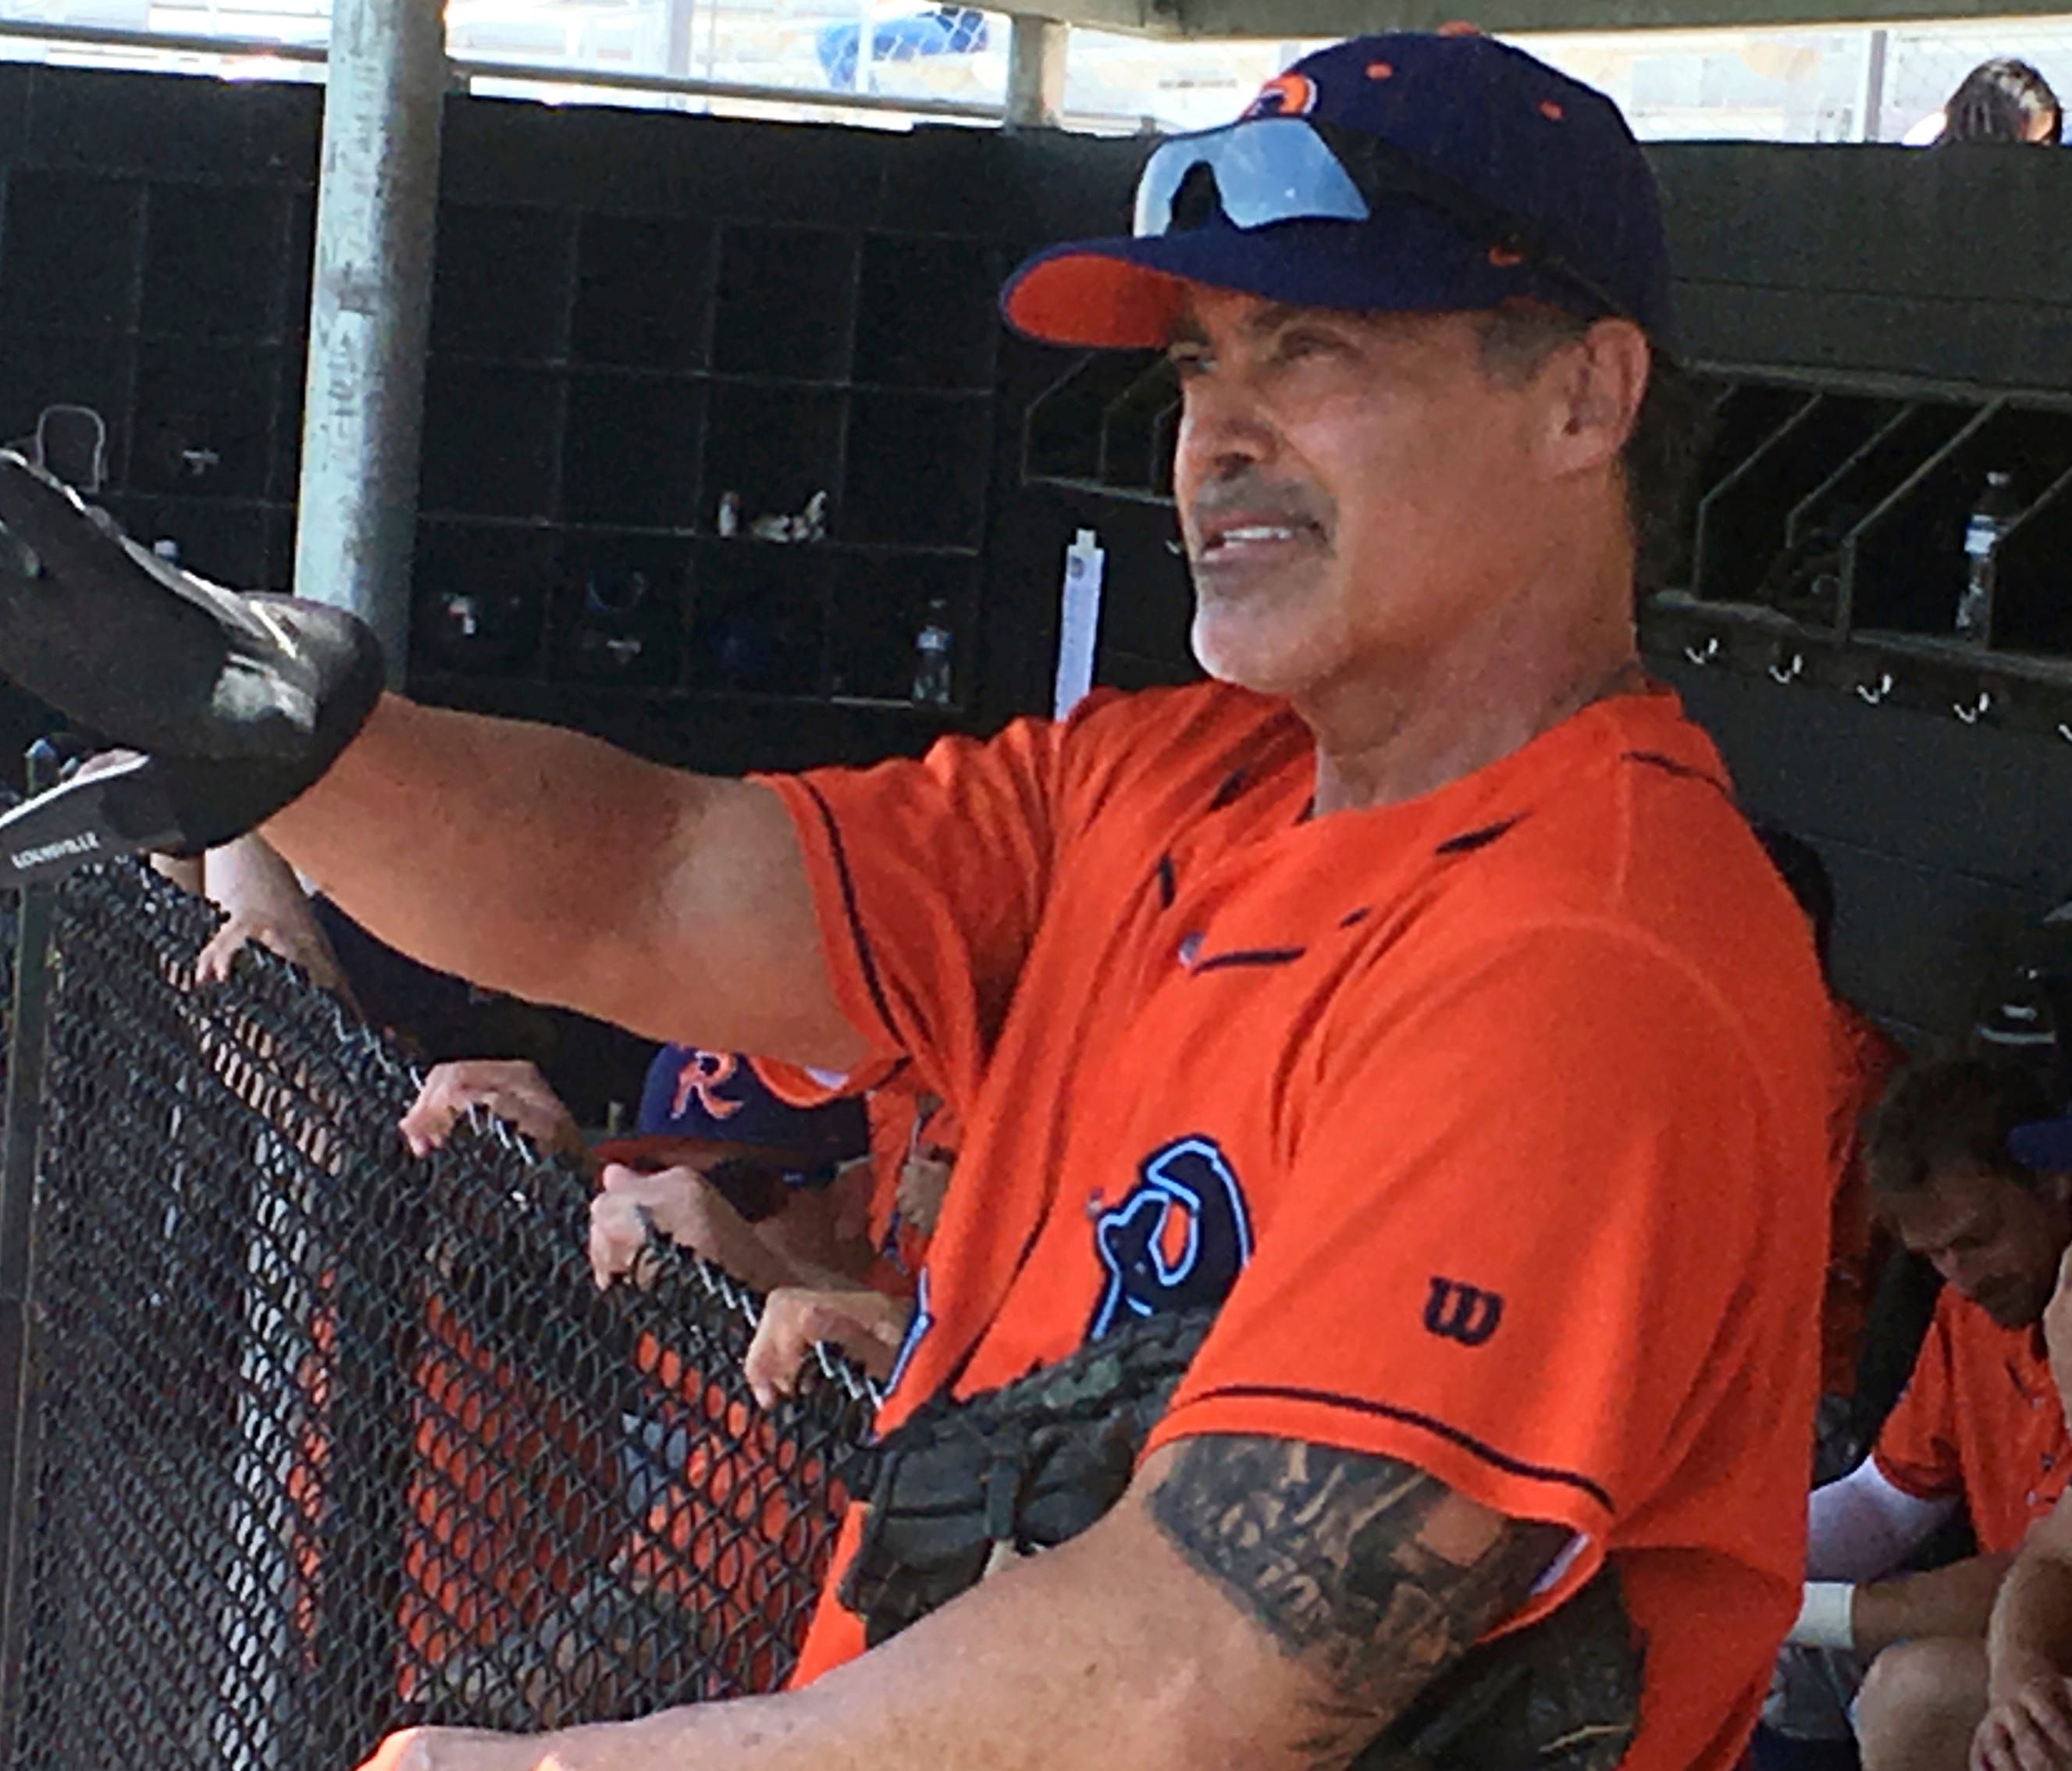 Cleburne Railroaders newly signed player and former Major League player, Rafael Palmeiro watches play from the dugout before heading back on the field during a spring training baseball game in Cleburne, Texas.